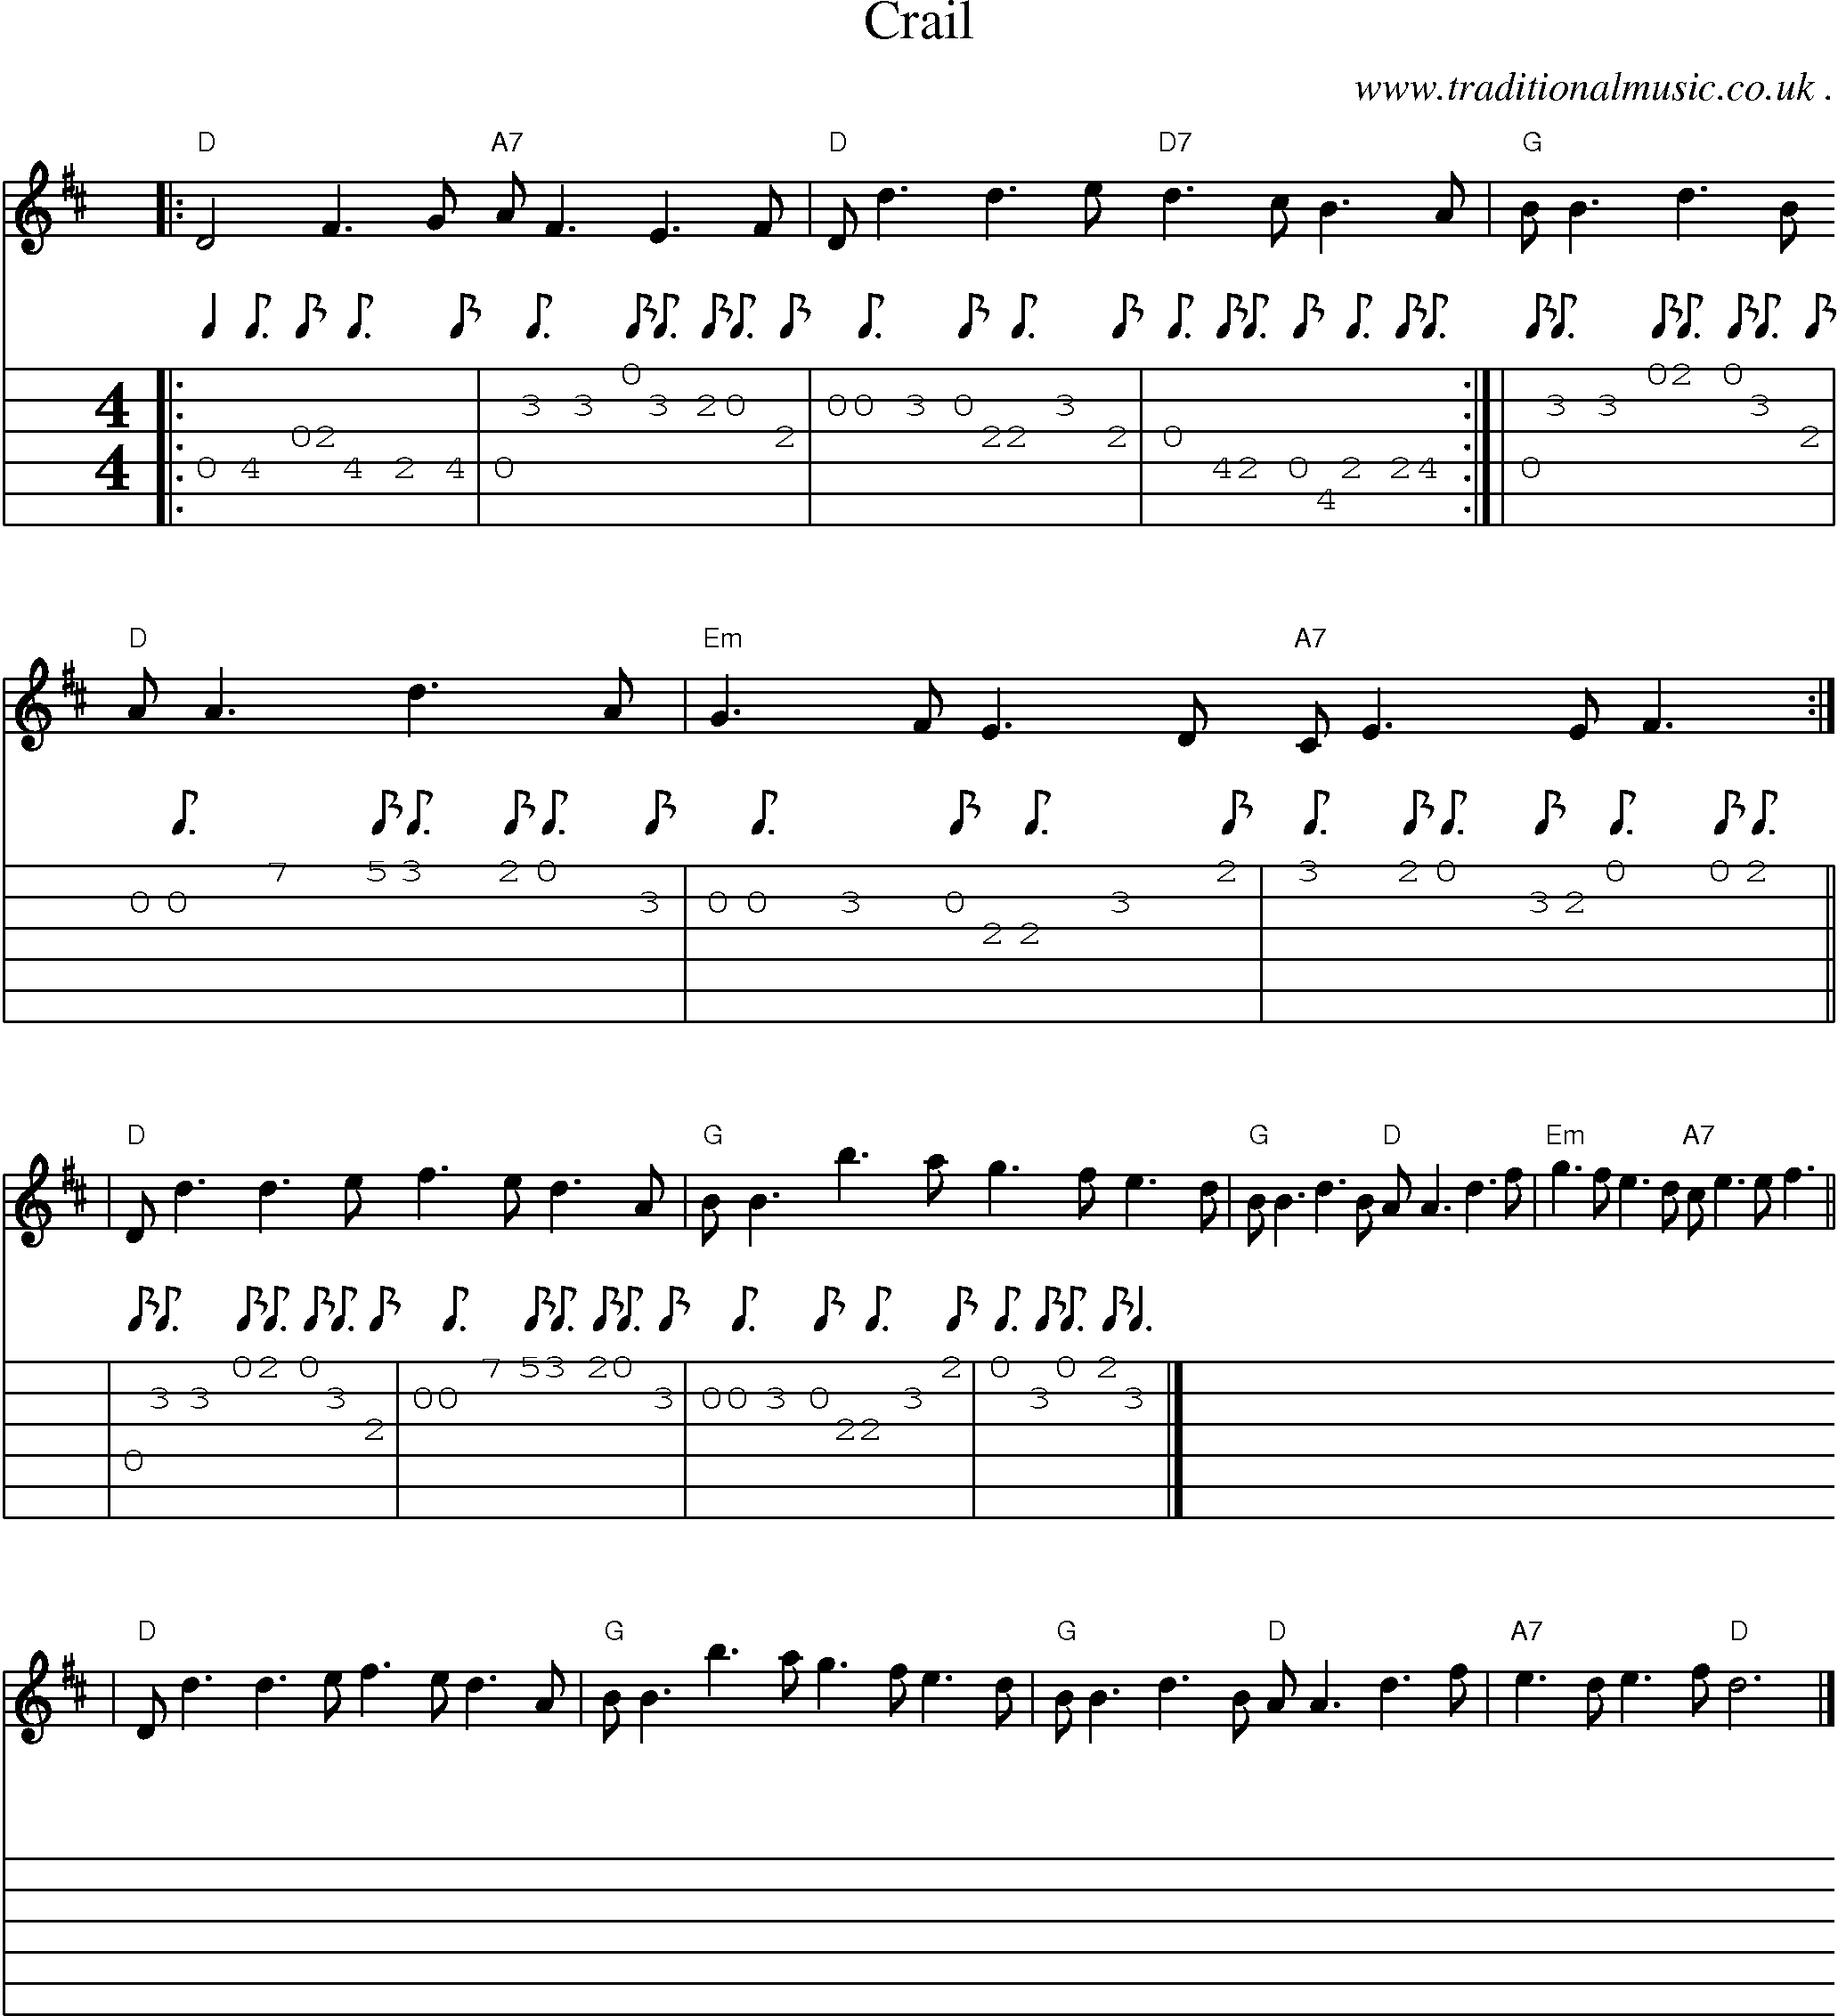 Sheet-music  score, Chords and Guitar Tabs for Crail